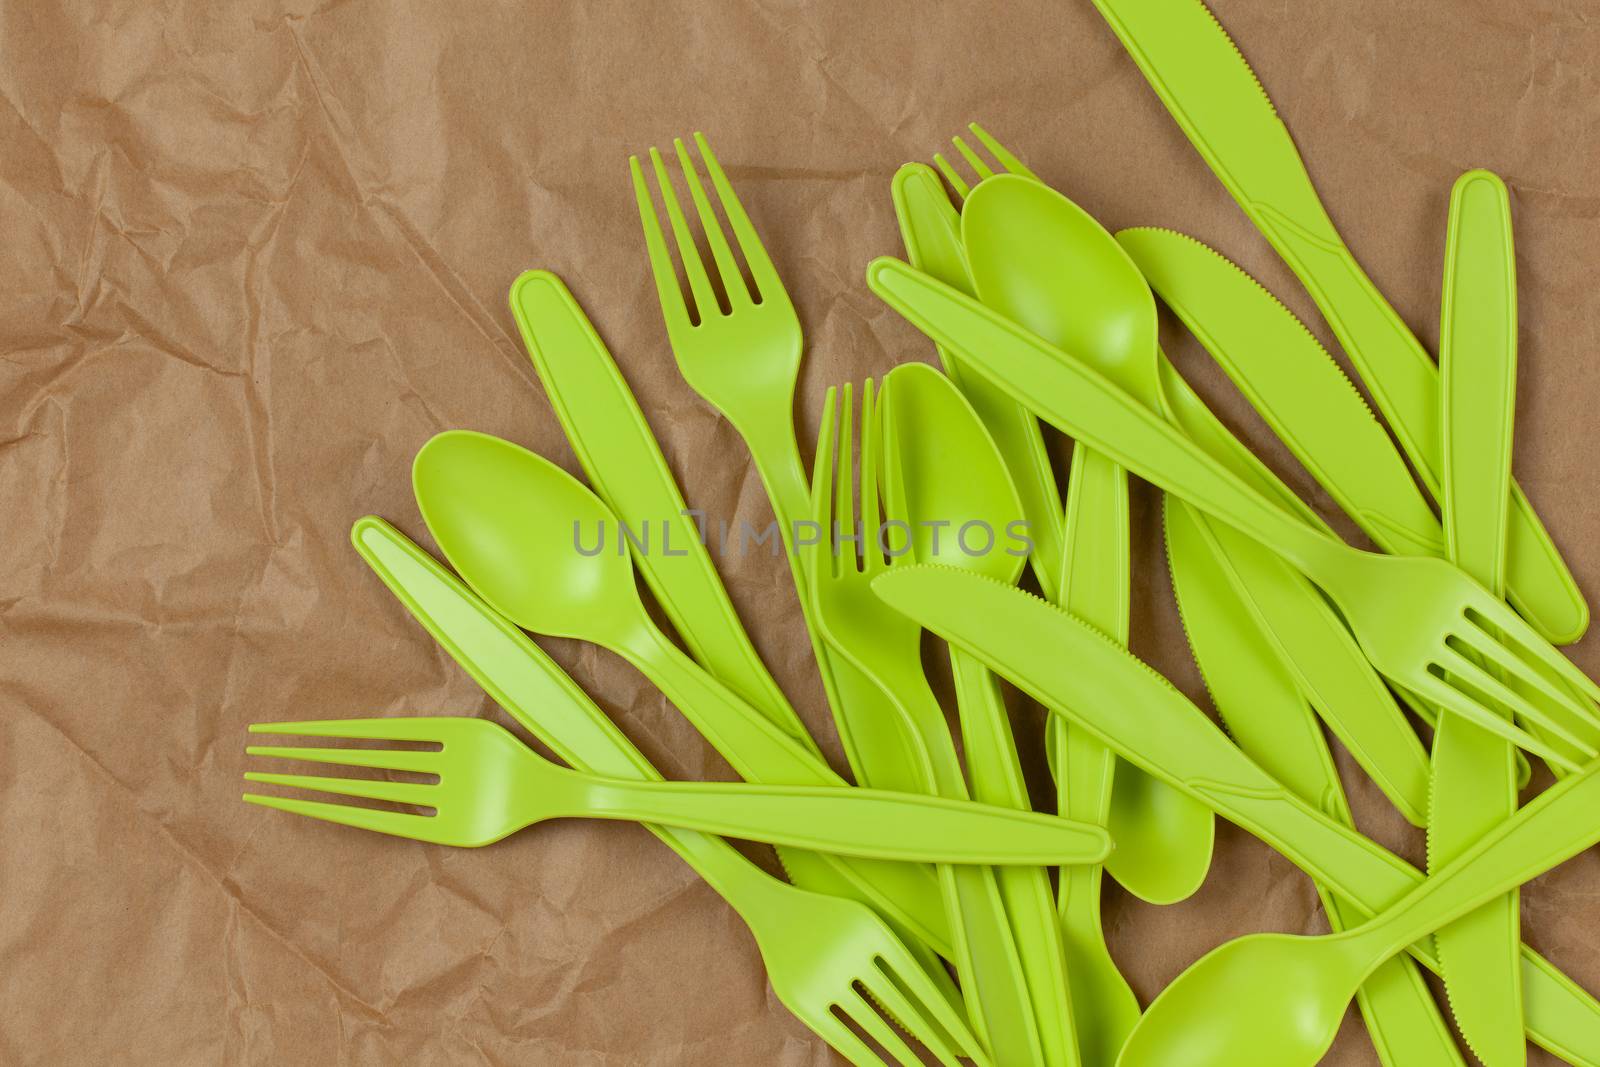 Background from reusable recyclable green forks, spoons, knifes made from corn starch on brown crumpled craft paper. Eco, zero waste, alternative to plastic concept. Flat lay. Horizontal. Closeup.